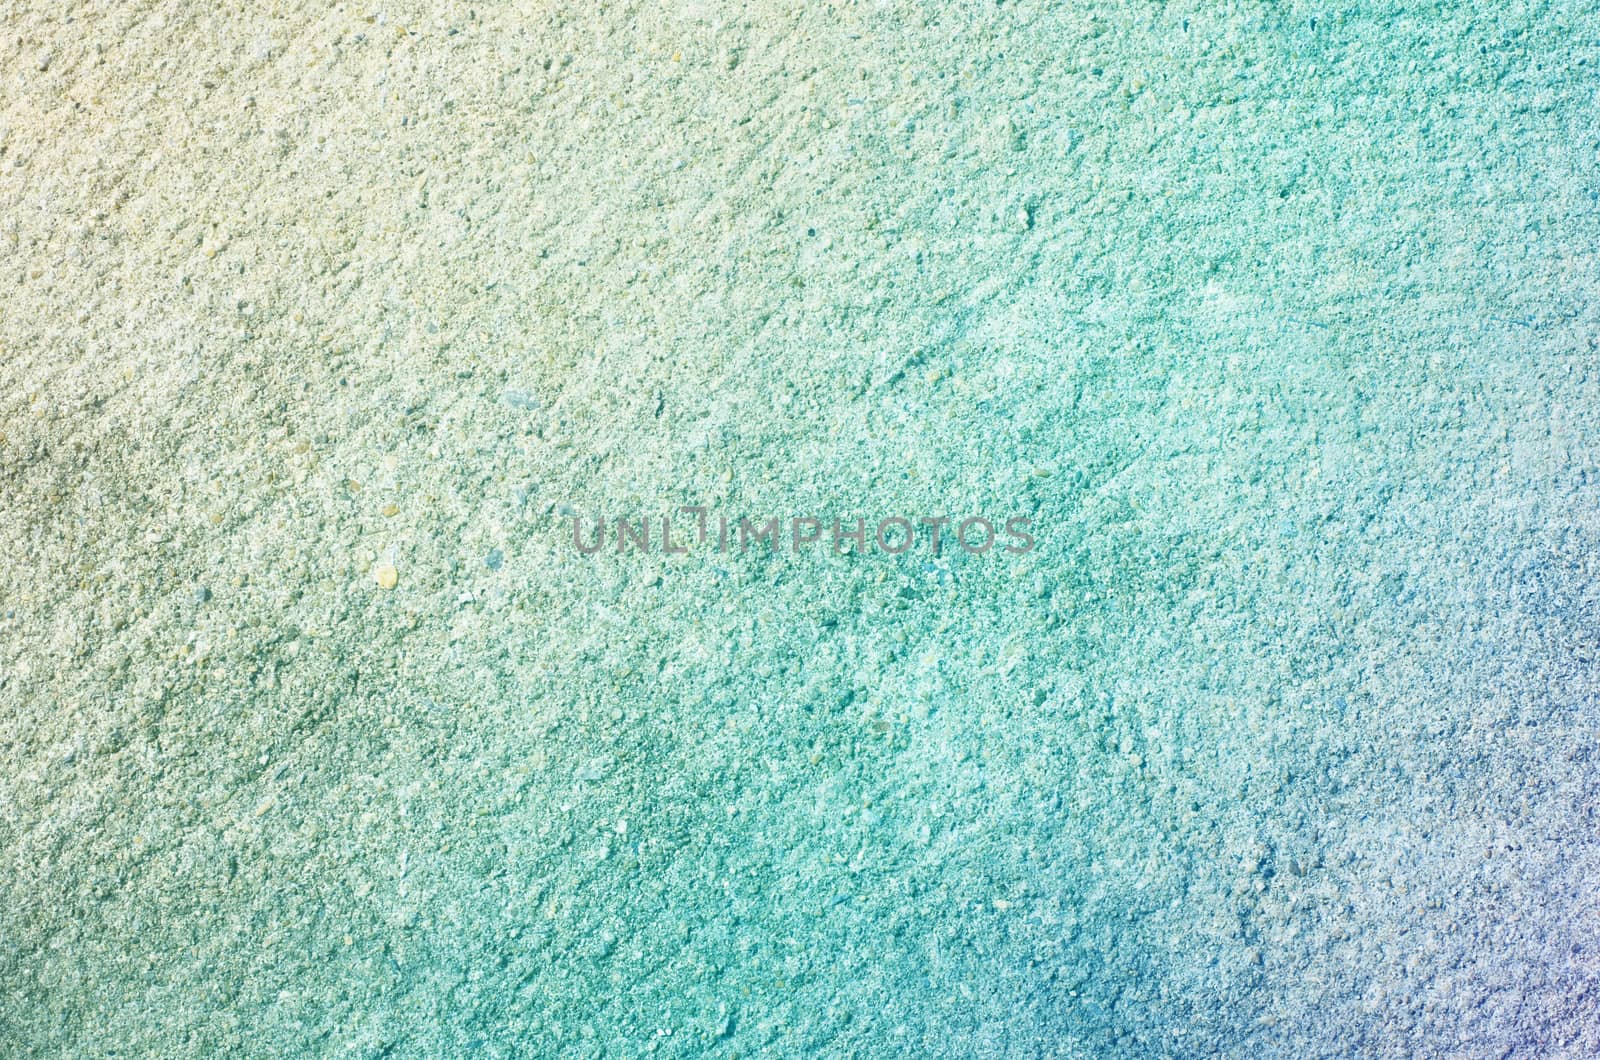 pastel color Cement concrete surface abstract background and texture